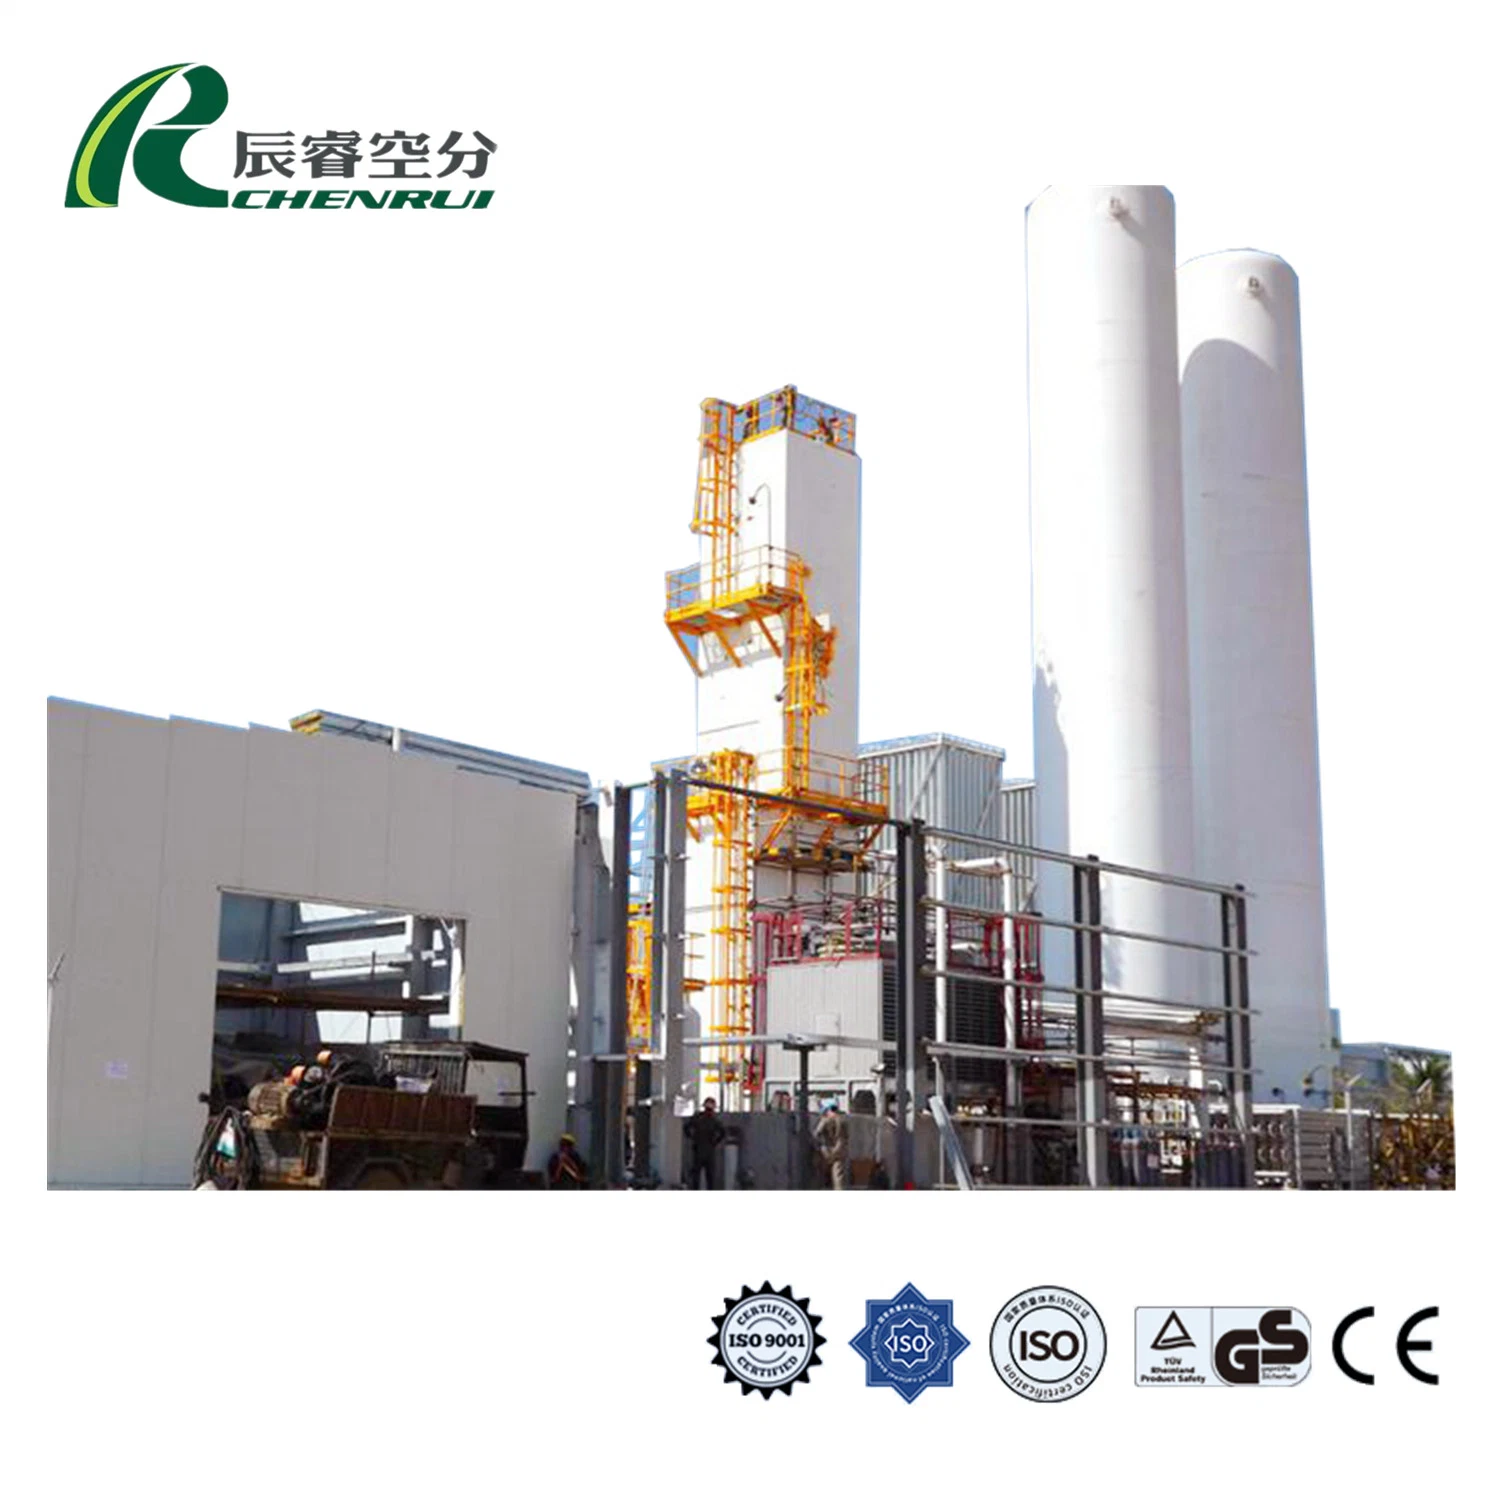 Hangzhou Chenrui Cost-Effective High-Performance Reliable Material Industry Nitrogen Generator